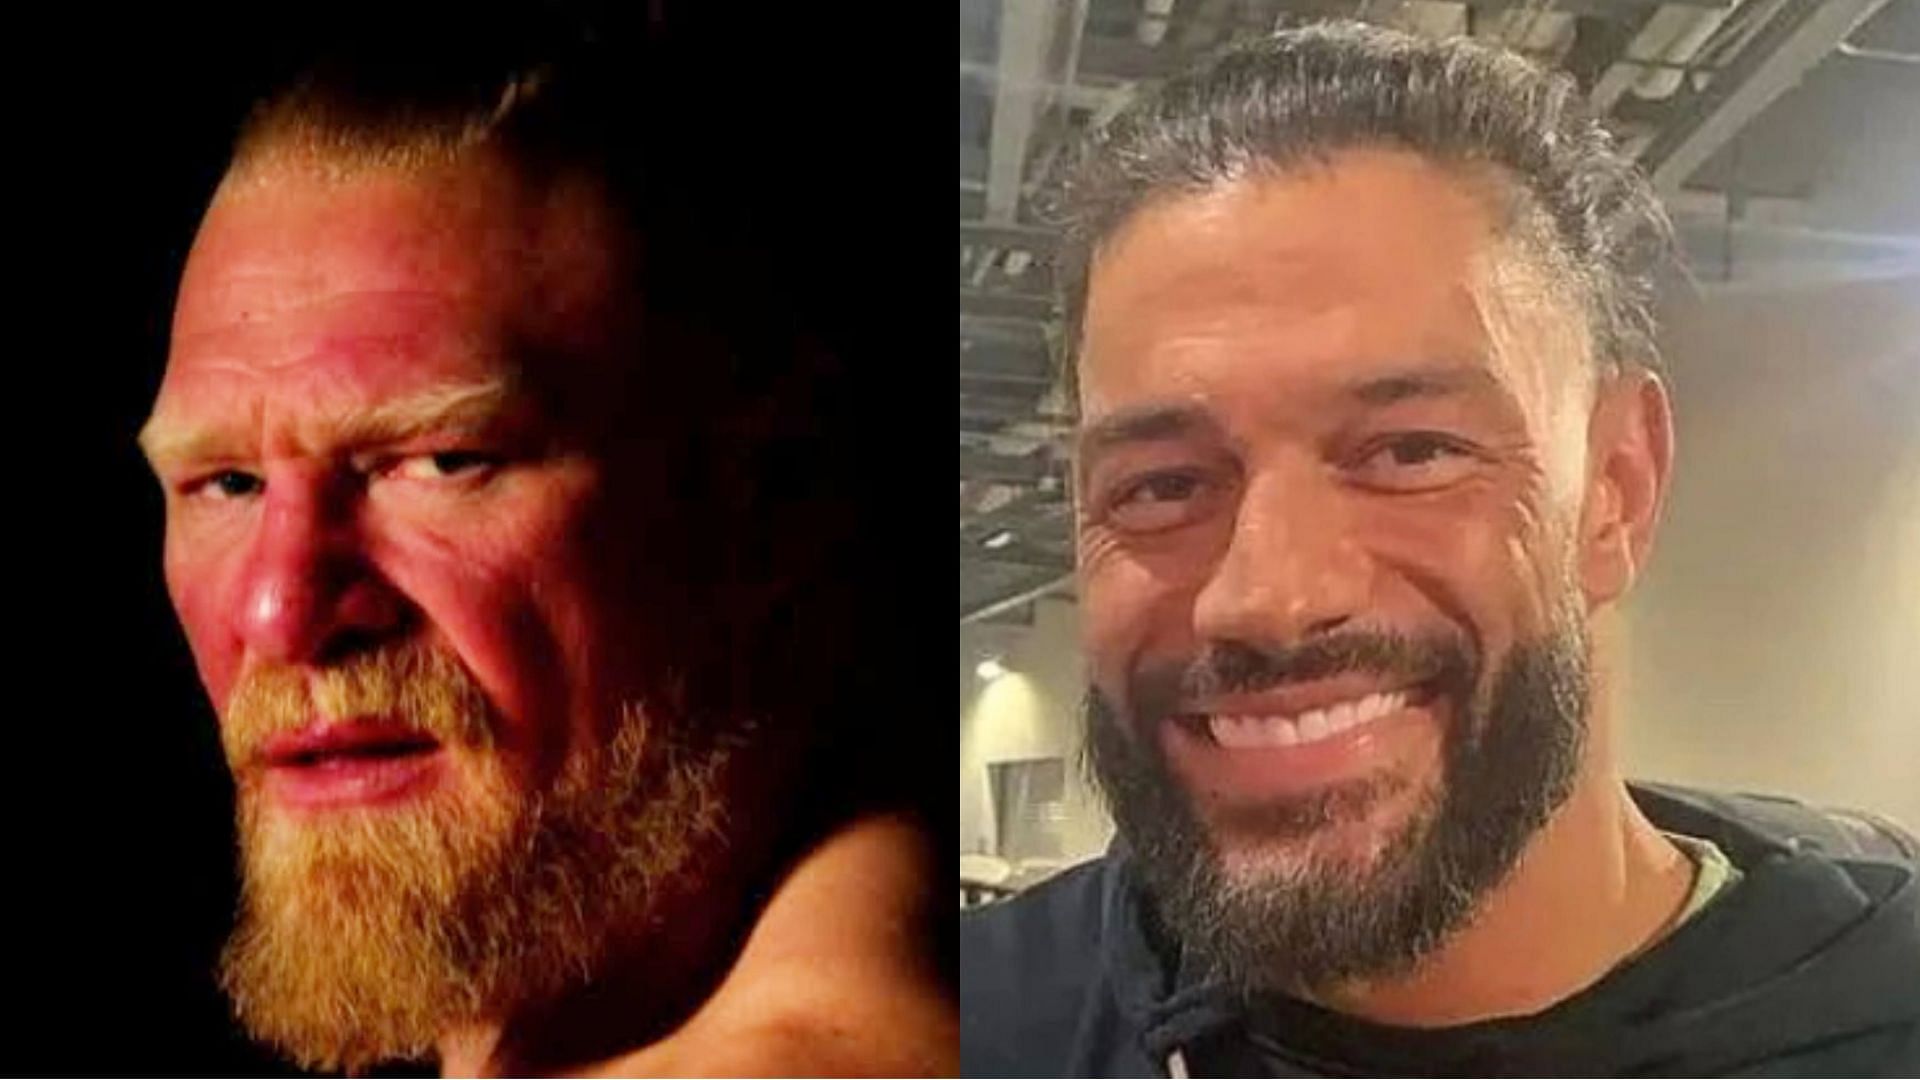 Brock Lesnar (left) and Undisputed WWE Universal Champion Roman Reigns (right)